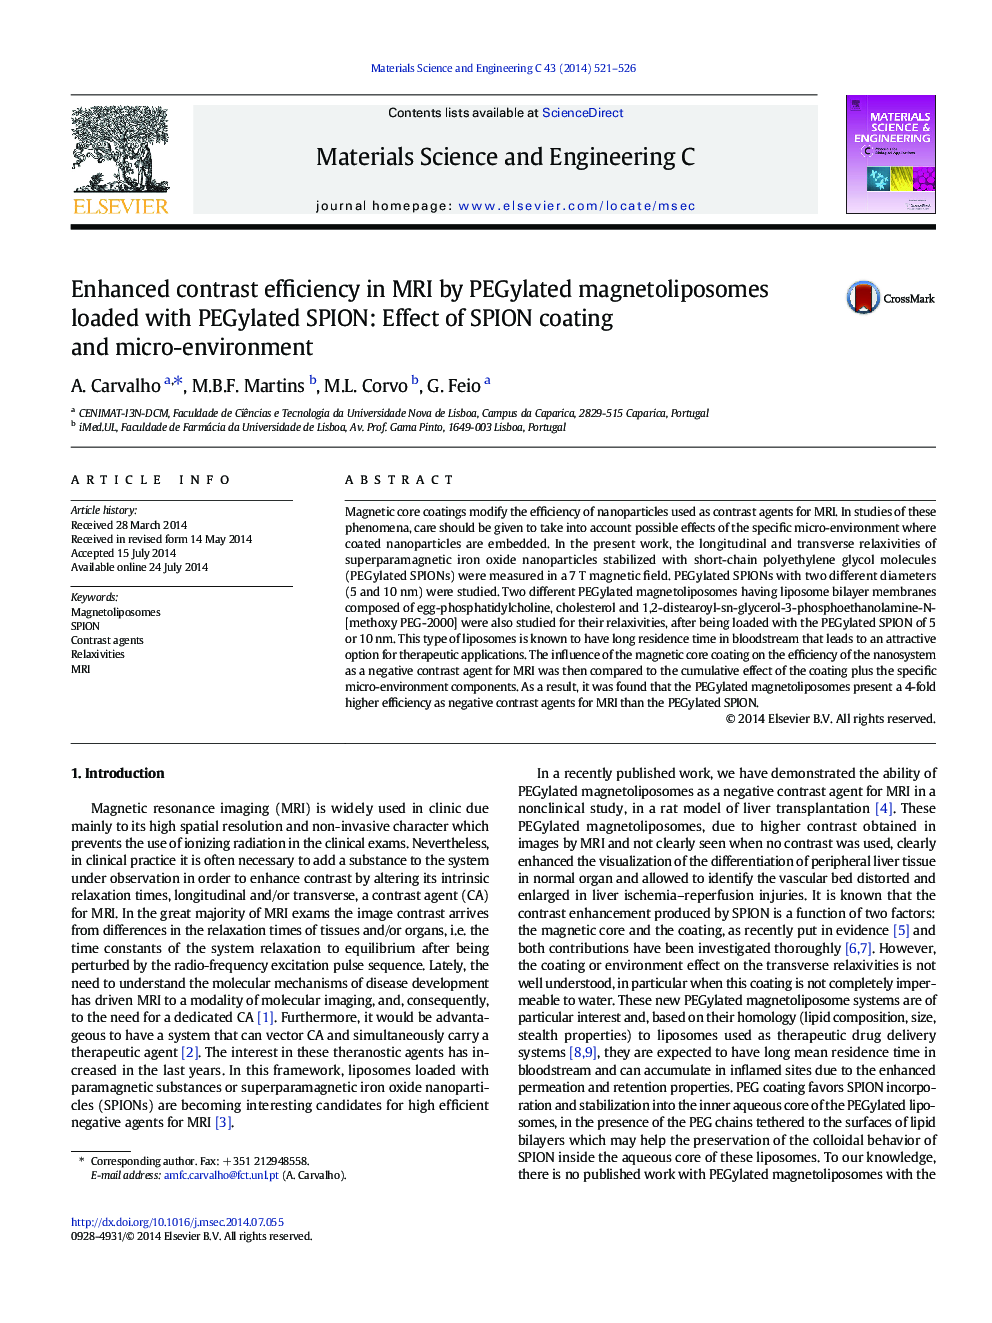 Enhanced contrast efficiency in MRI by PEGylated magnetoliposomes loaded with PEGylated SPION: Effect of SPION coating and micro-environment